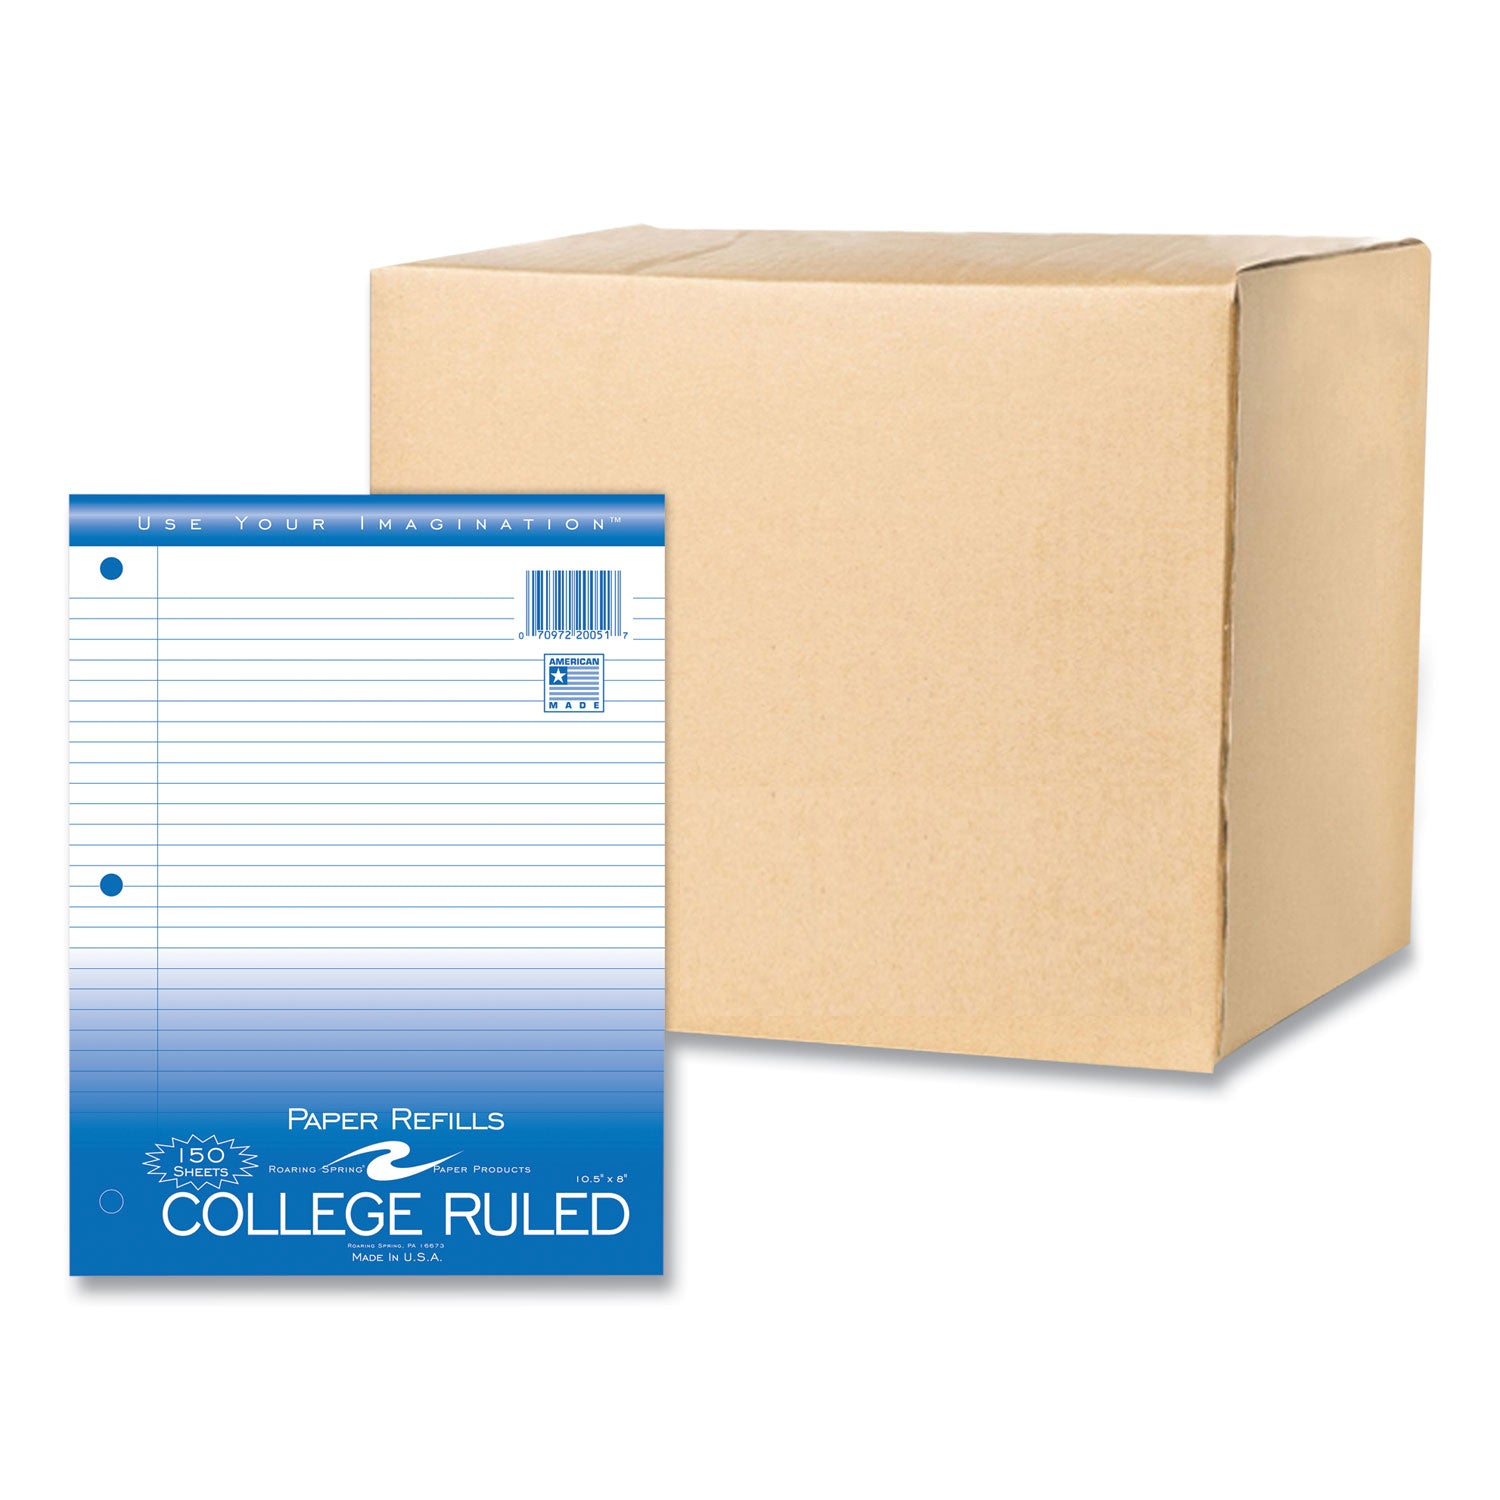 loose-leaf-paper-8-x-105-3-hole-punched-college-rule-white-150-sheets-pack-24-packs-carton-ships-in-4-6-business-days_roa20051cs - 5